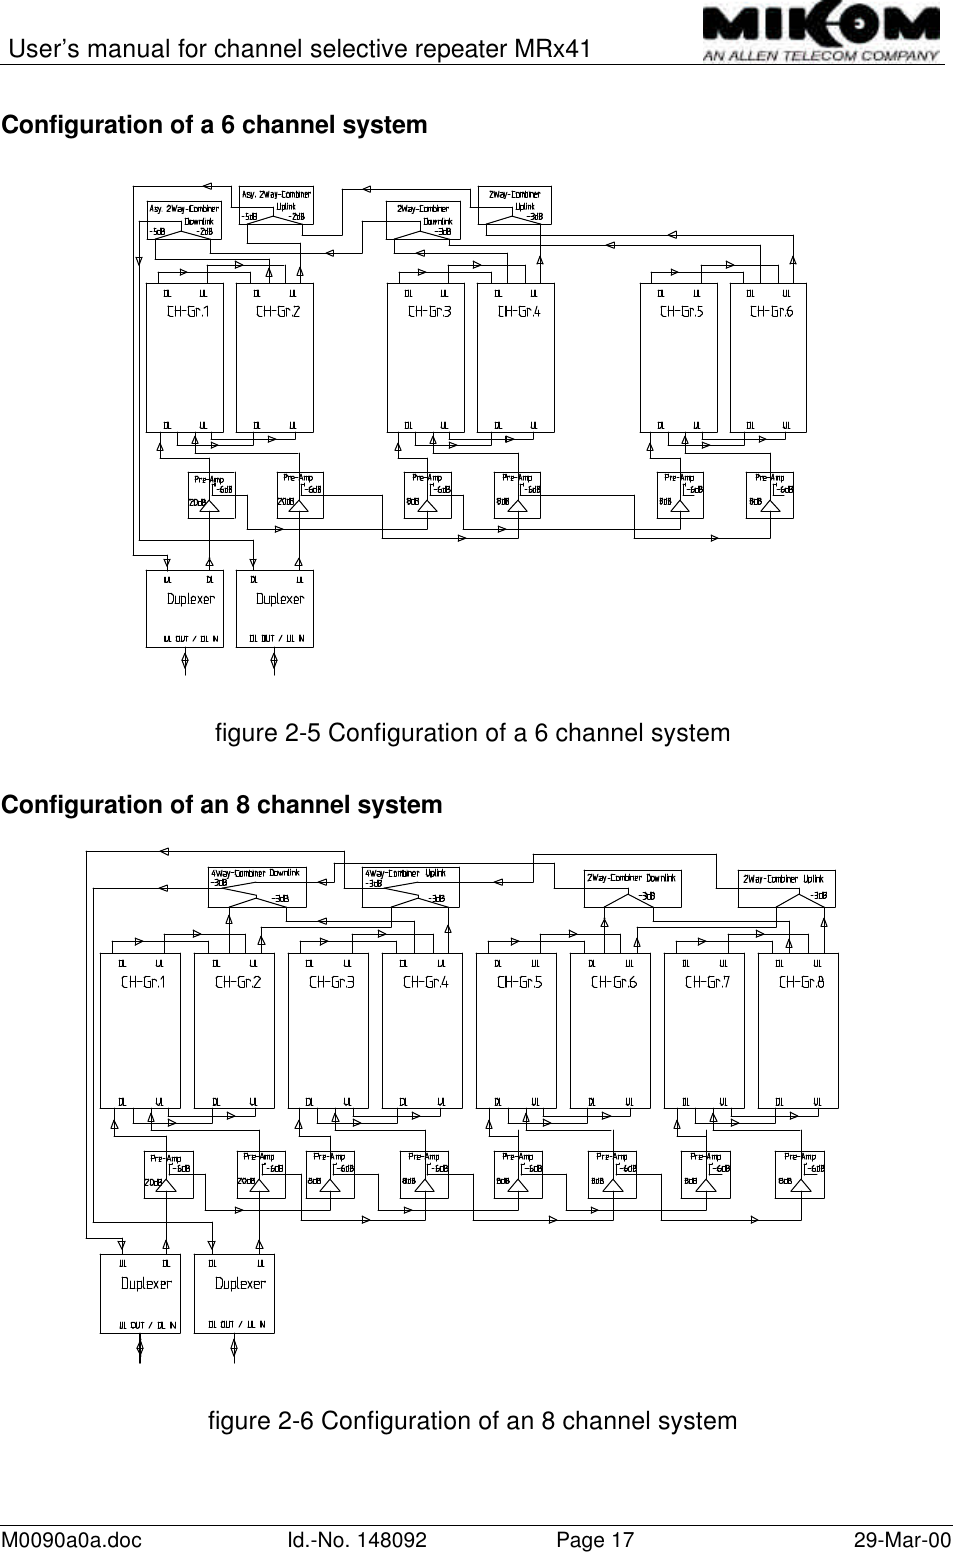 User’s manual for channel selective repeater MRx41M0090a0a.doc Id.-No. 148092 Page 17 29-Mar-00Configuration of a 6 channel systemfigure 2-5 Configuration of a 6 channel systemConfiguration of an 8 channel systemfigure 2-6 Configuration of an 8 channel system